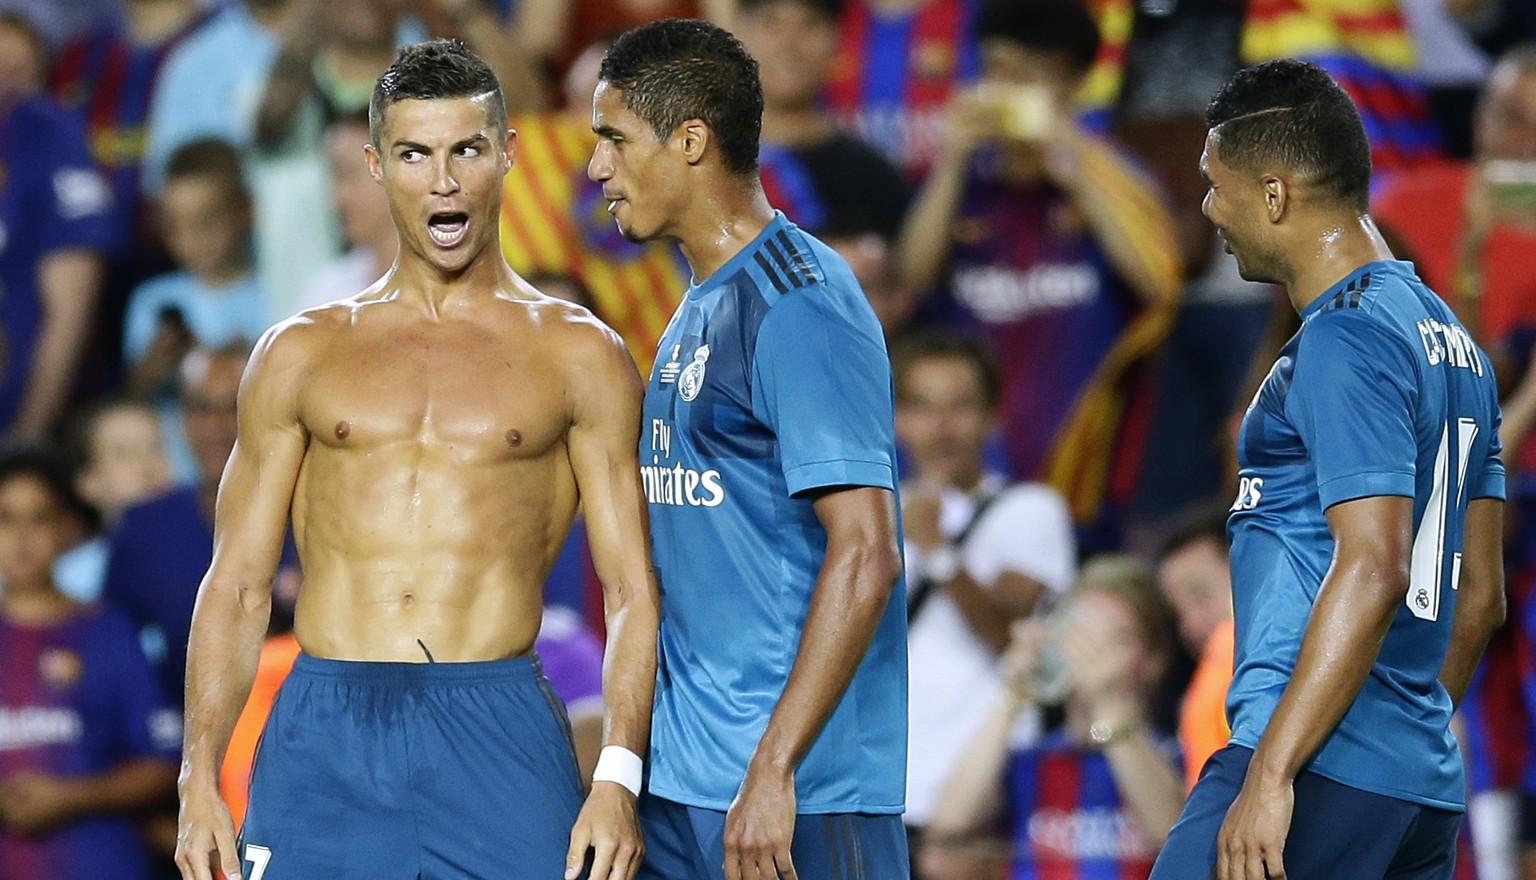 Real Madrid&#039;s Cristiano Ronaldo, left, celebrates after scoring during the Spanish Supercup, first leg, soccer match between FC Barcelona and Real Madrid at the Camp Nou stadium in Barcelona, Spa ...